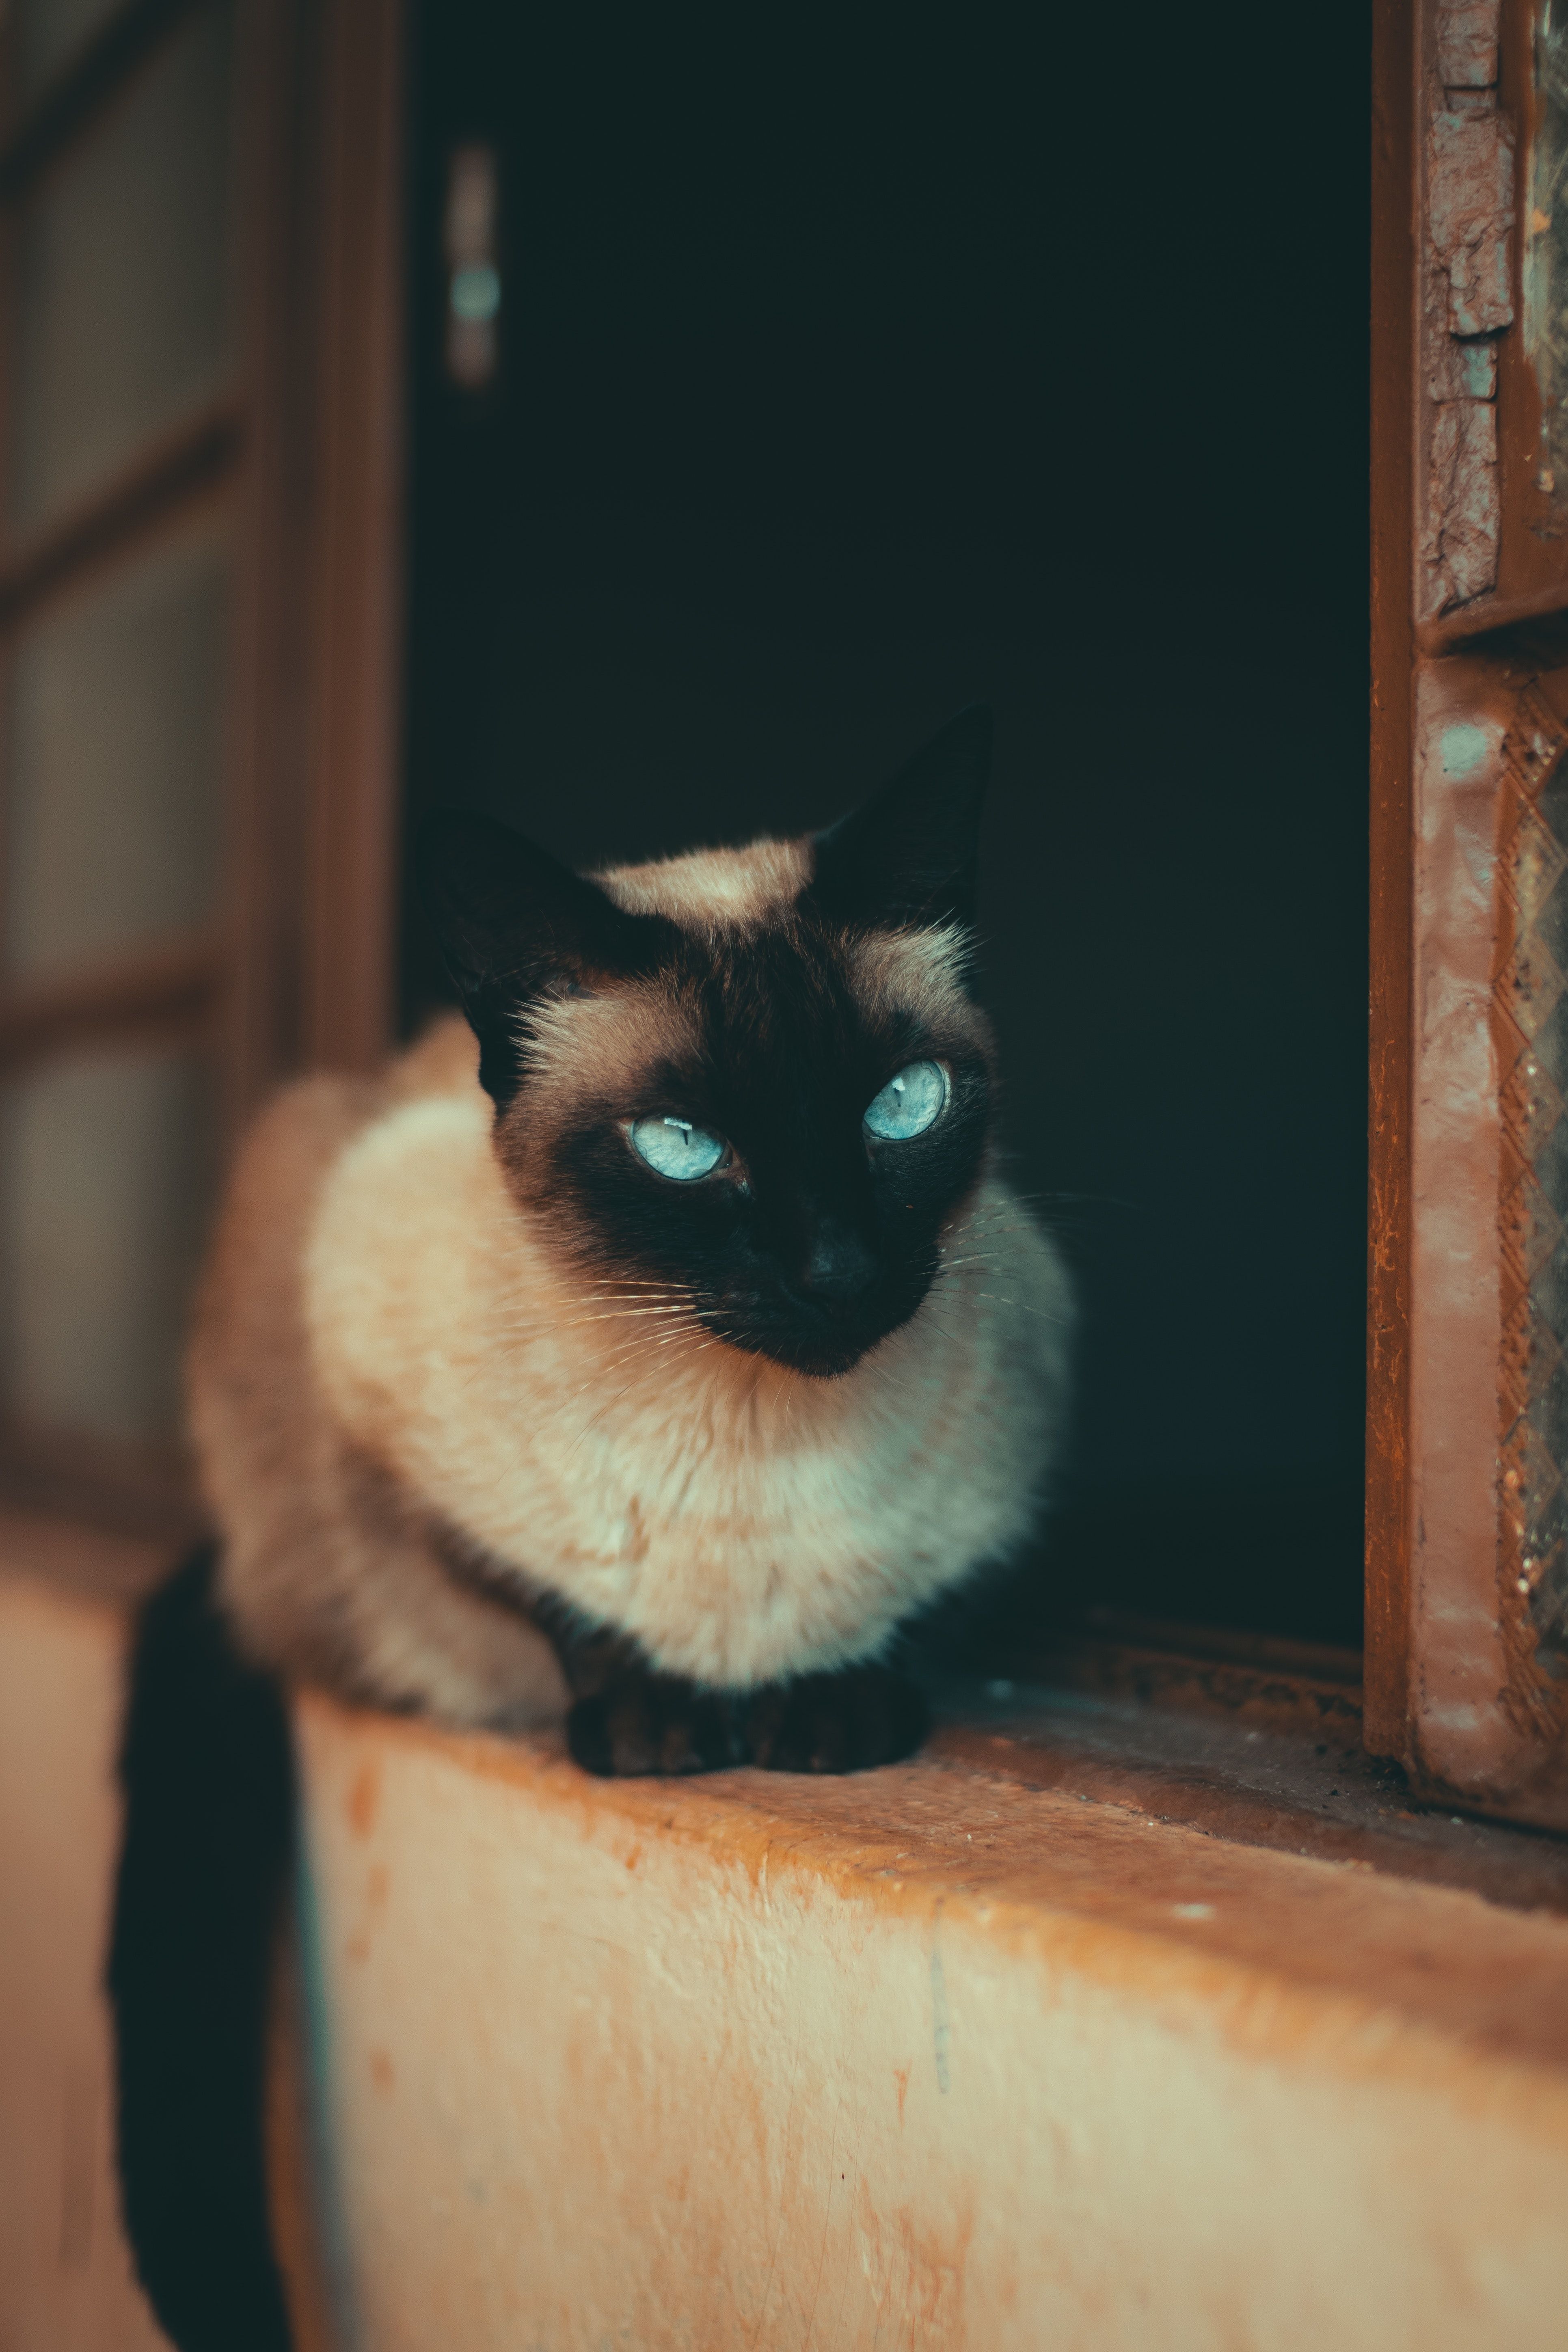 A black and white cat with blue eyes sitting on a windowsill. - Cat